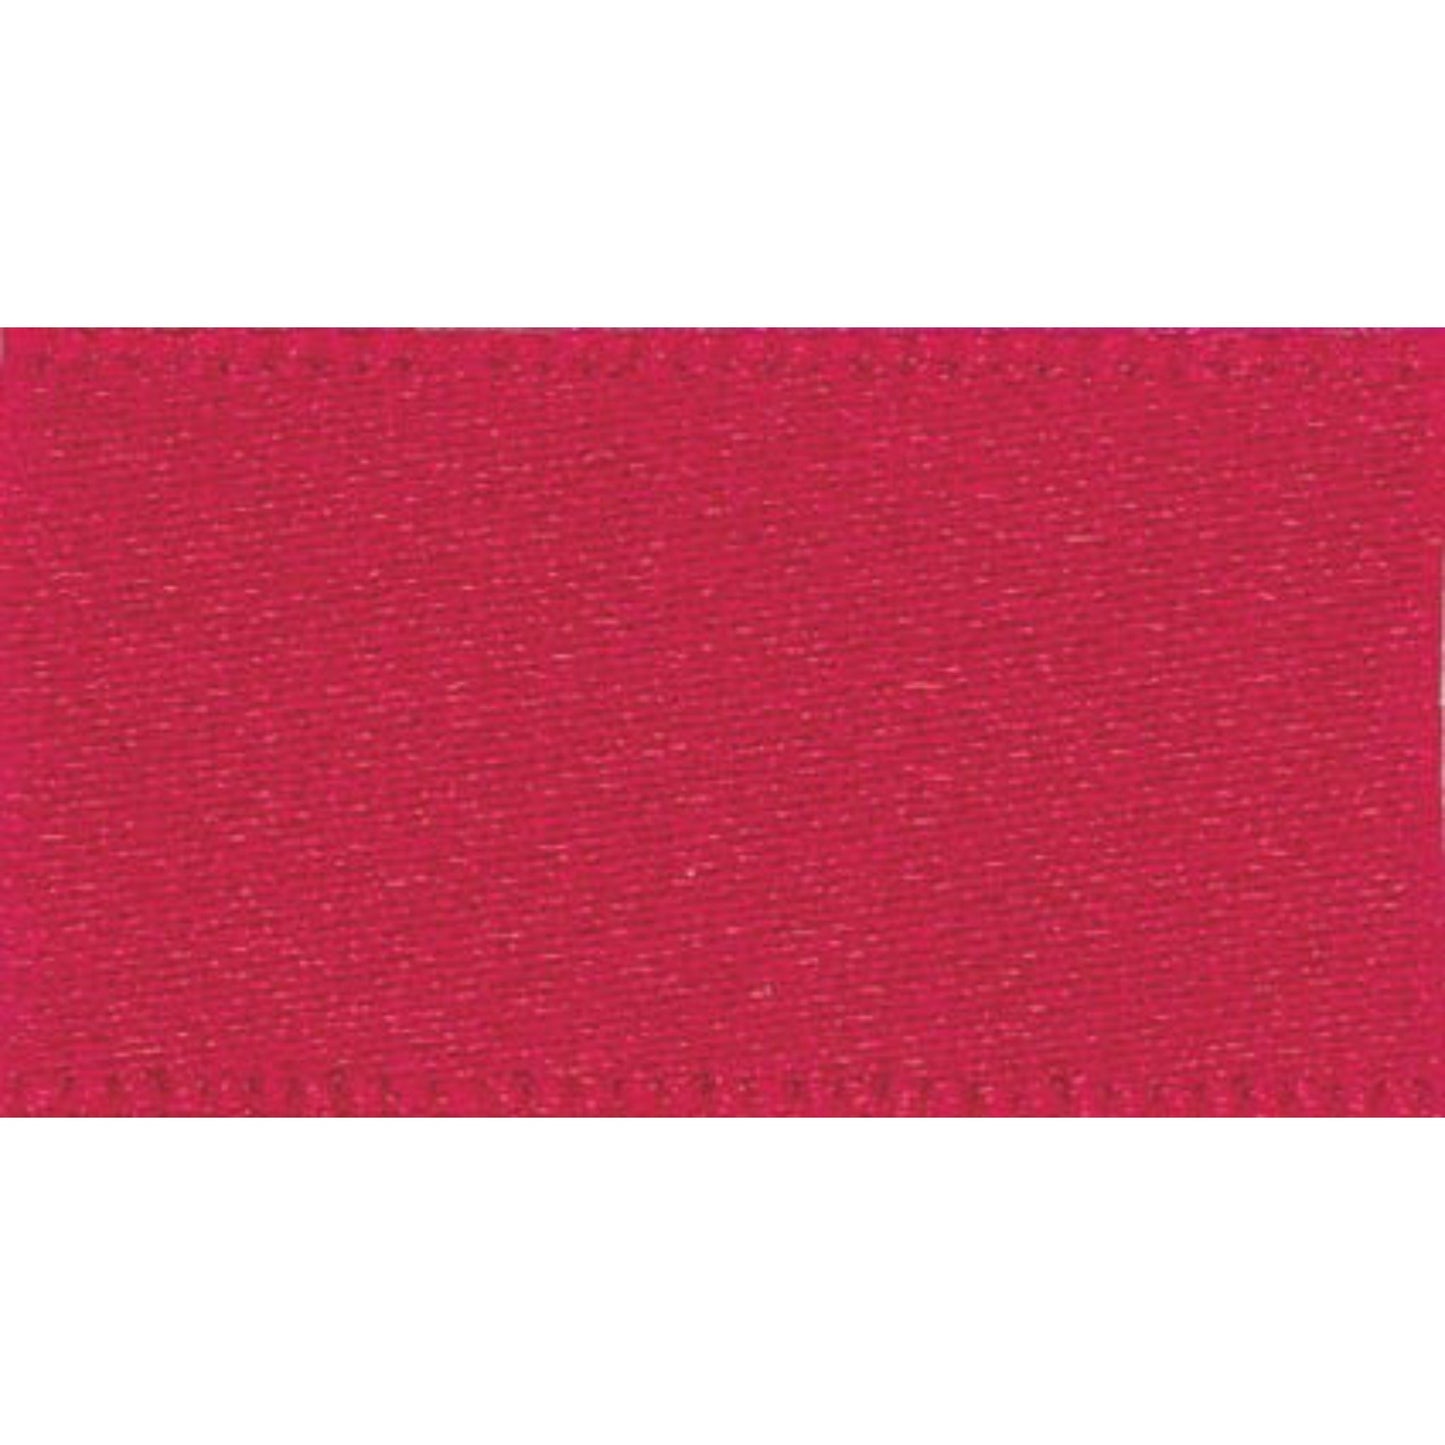 Double Faced Satin Ribbon: Red: 3mm Wide. Price per metre.